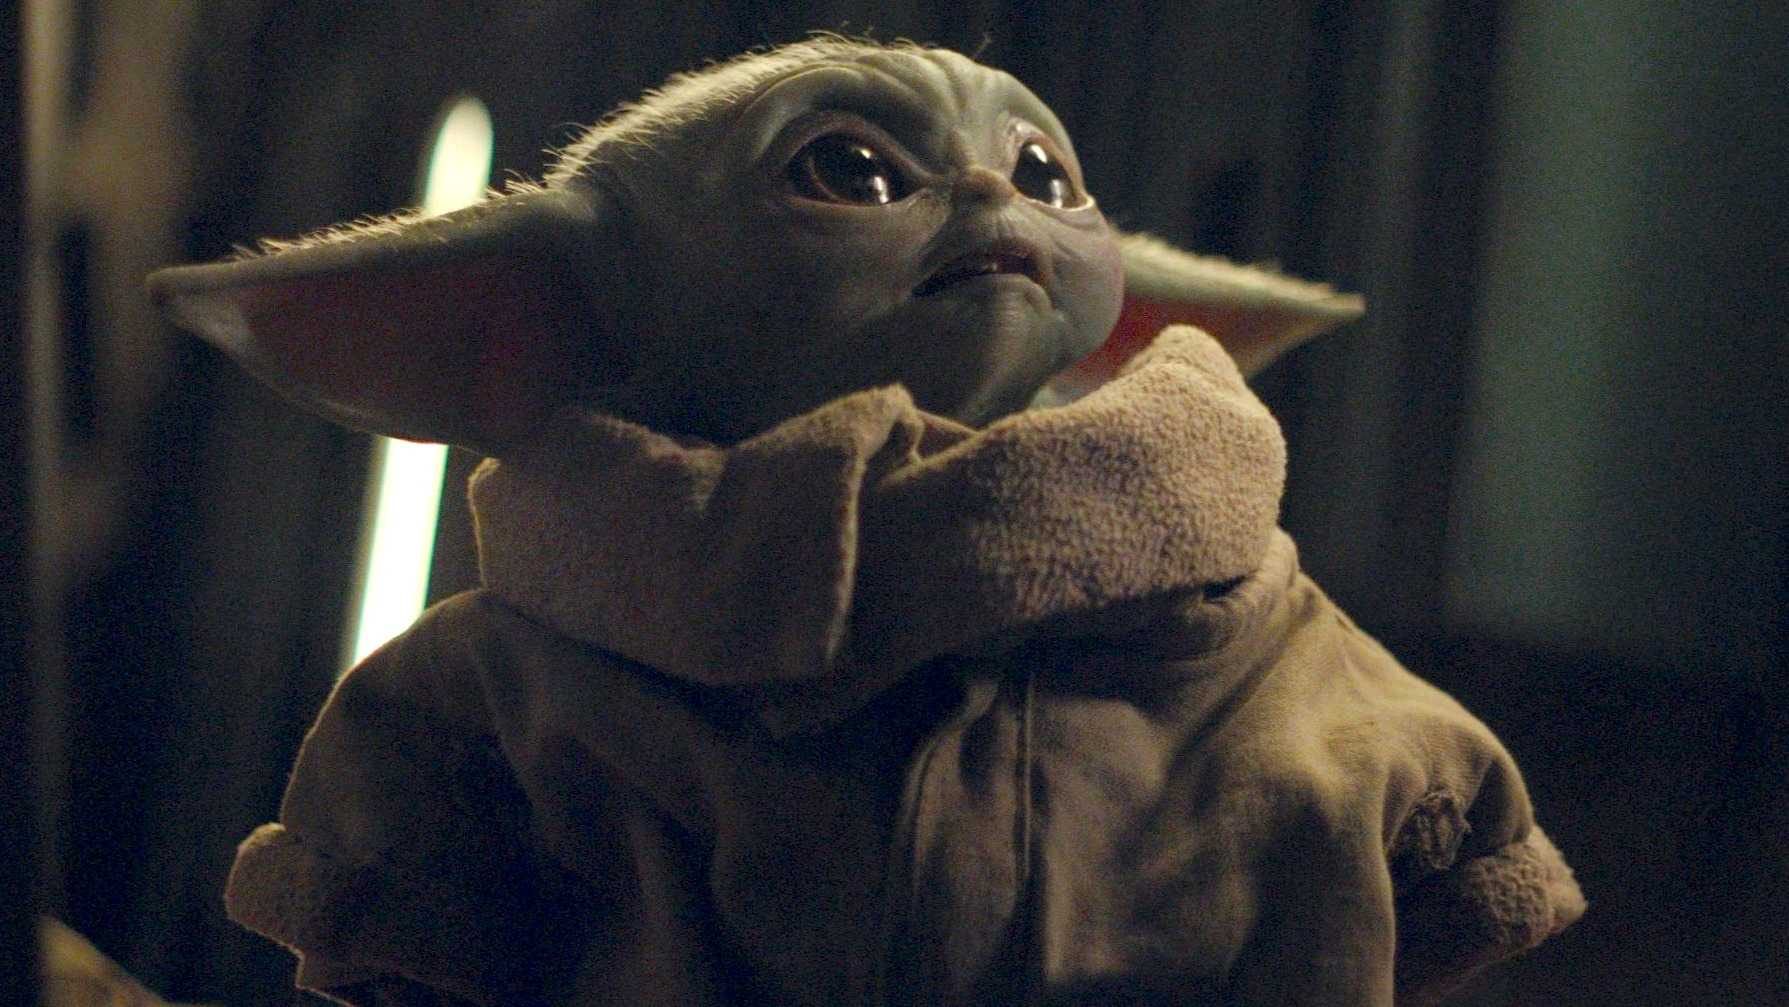 More Baby Yoda? ‘Mandalorian’ back in October as spin-offs mulled